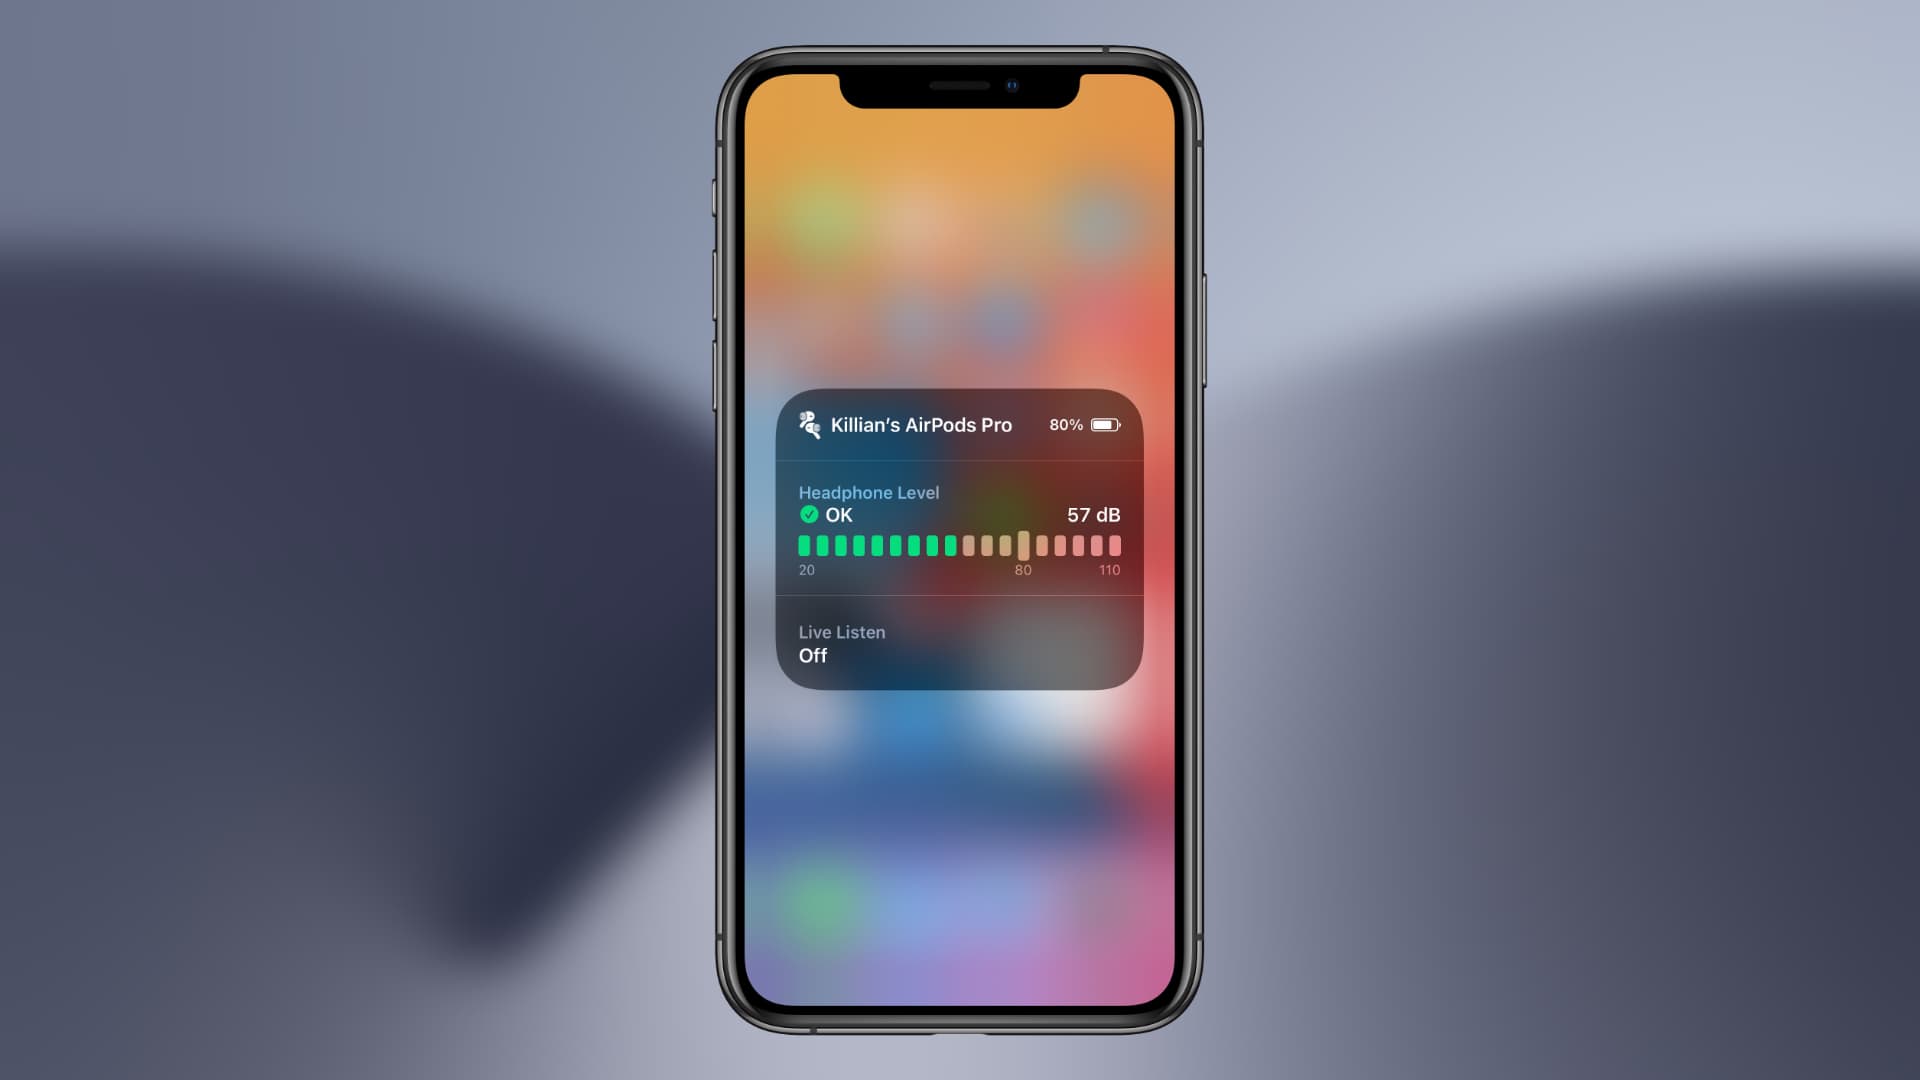 AirPods measuring noise levels in iOS 14